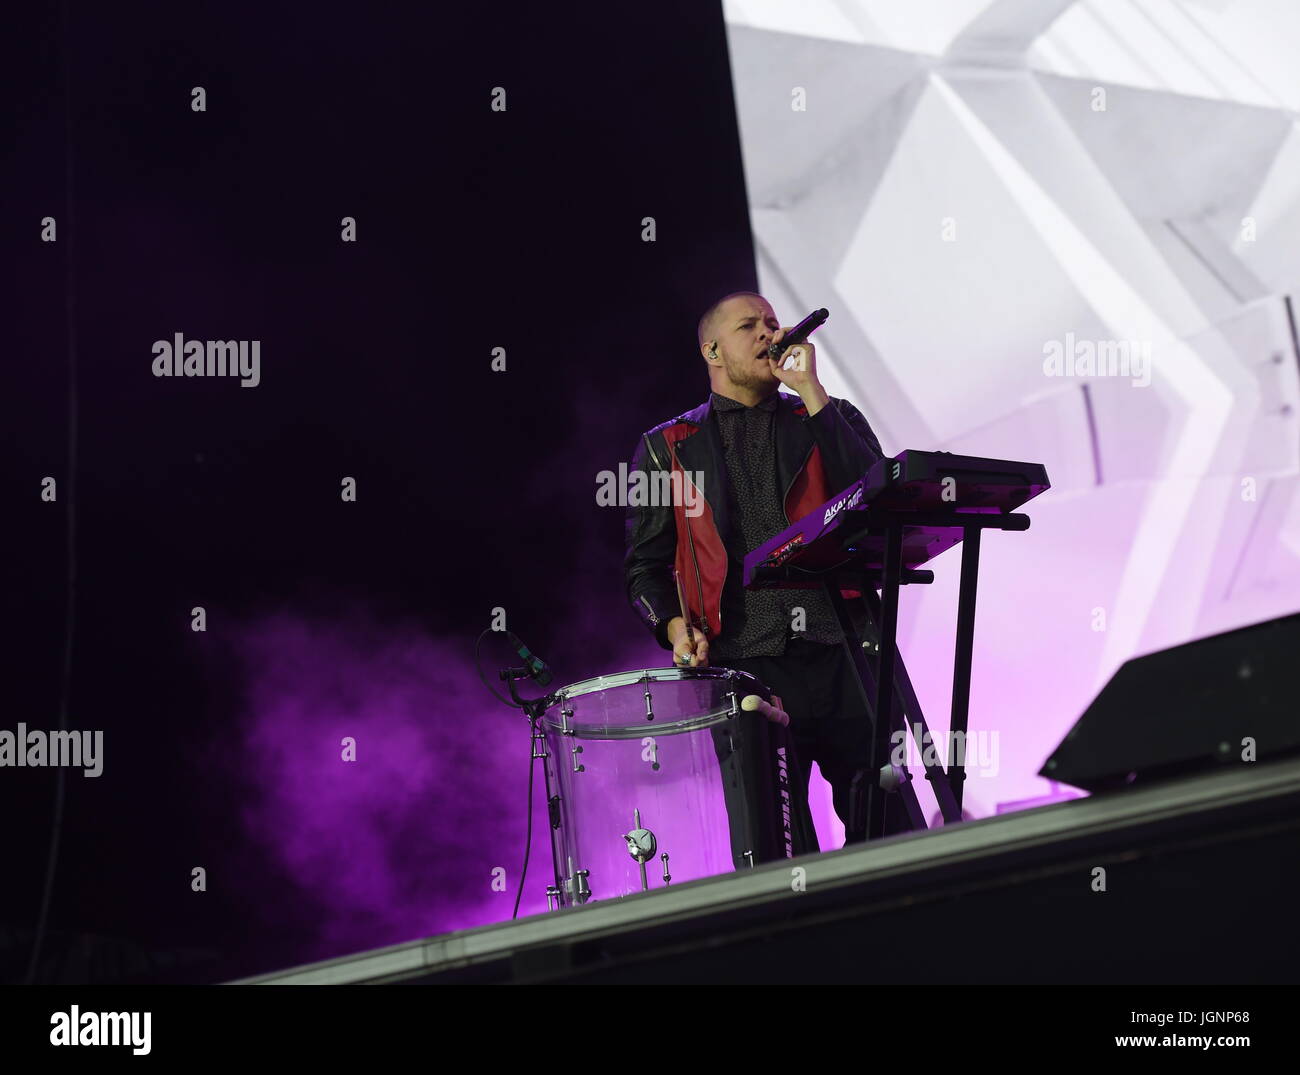 Lisbon, Portugal. 8th July, 2017. US band Imagine Dragons' singer and guitarist Dan Reynolds performs during the 11th Alive Festival in Lisbon, Portugal, on July 8, 2017. Credit: Zhang Liyun/Xinhua/Alamy Live News Stock Photo